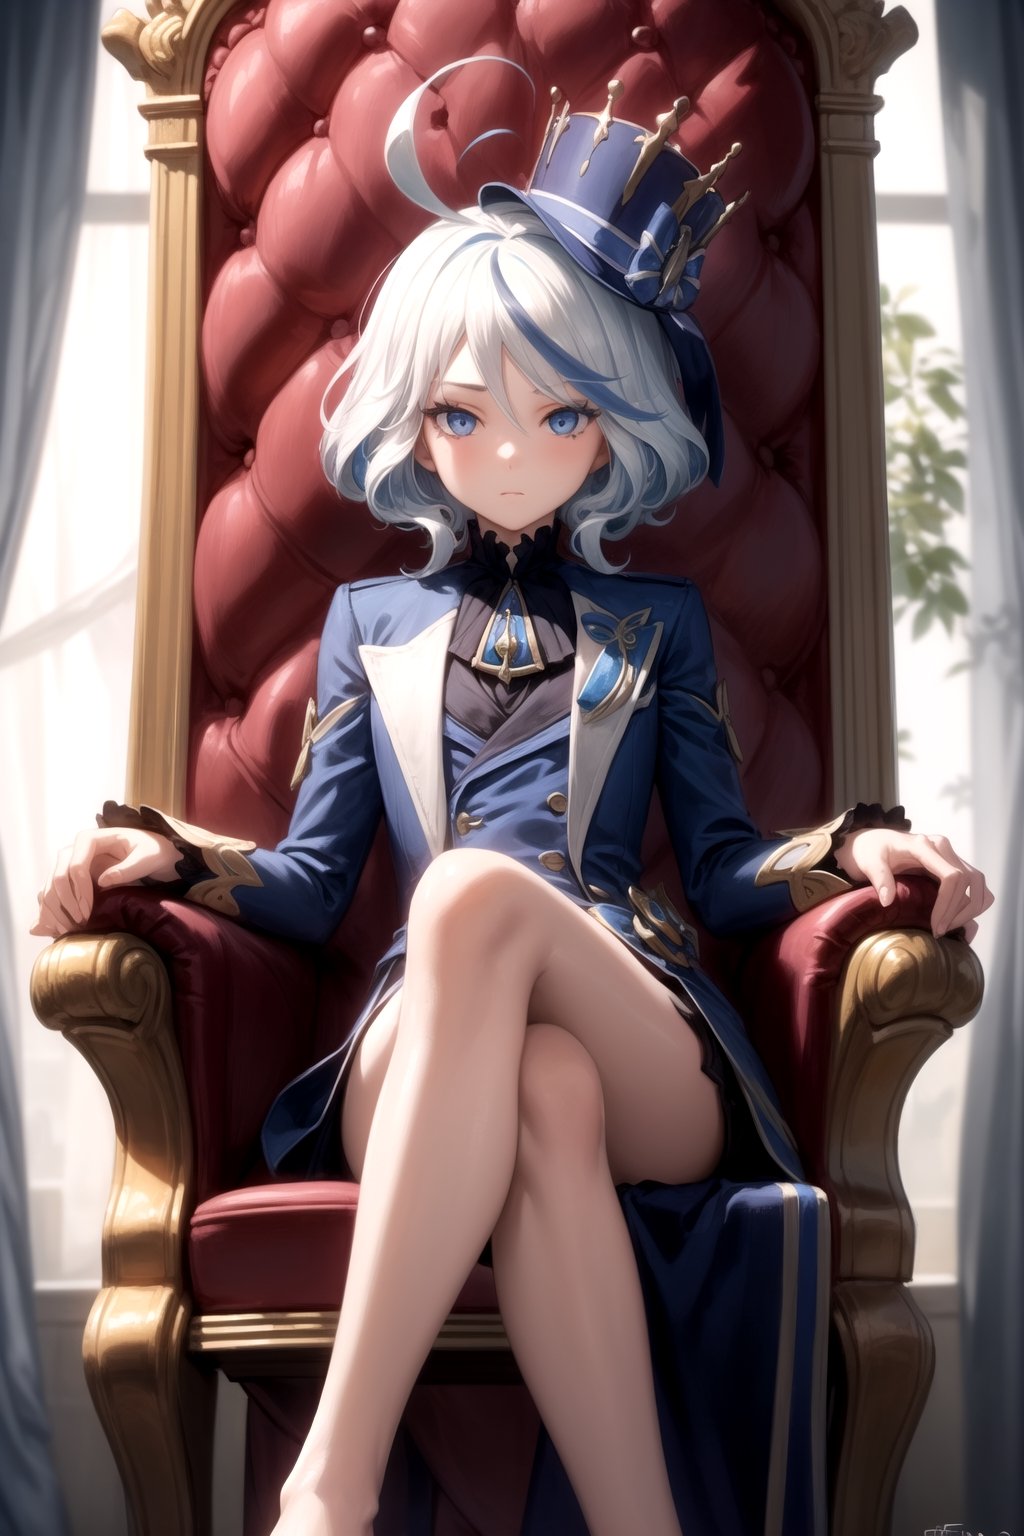 1 girl,  overconfident blue eyes,  blue hair,  white hair,  streaked hair,  ahoge,  small breast,  flat chest,  quirky,  white frilll long blouse,  dark blue military coat, dark denim short, looking at viewer,  body straight towards viewer,  Masterpiece,  fair skin,  photorealistic,  sitting on throne,  cross legs with bare foot,  throne_room_background,  more_details:-1,  more_details:0,  more_details:0.5,  more_details:1,  more_details:1.5,  furinadef,  furinarnd,furinadef,furinarnd